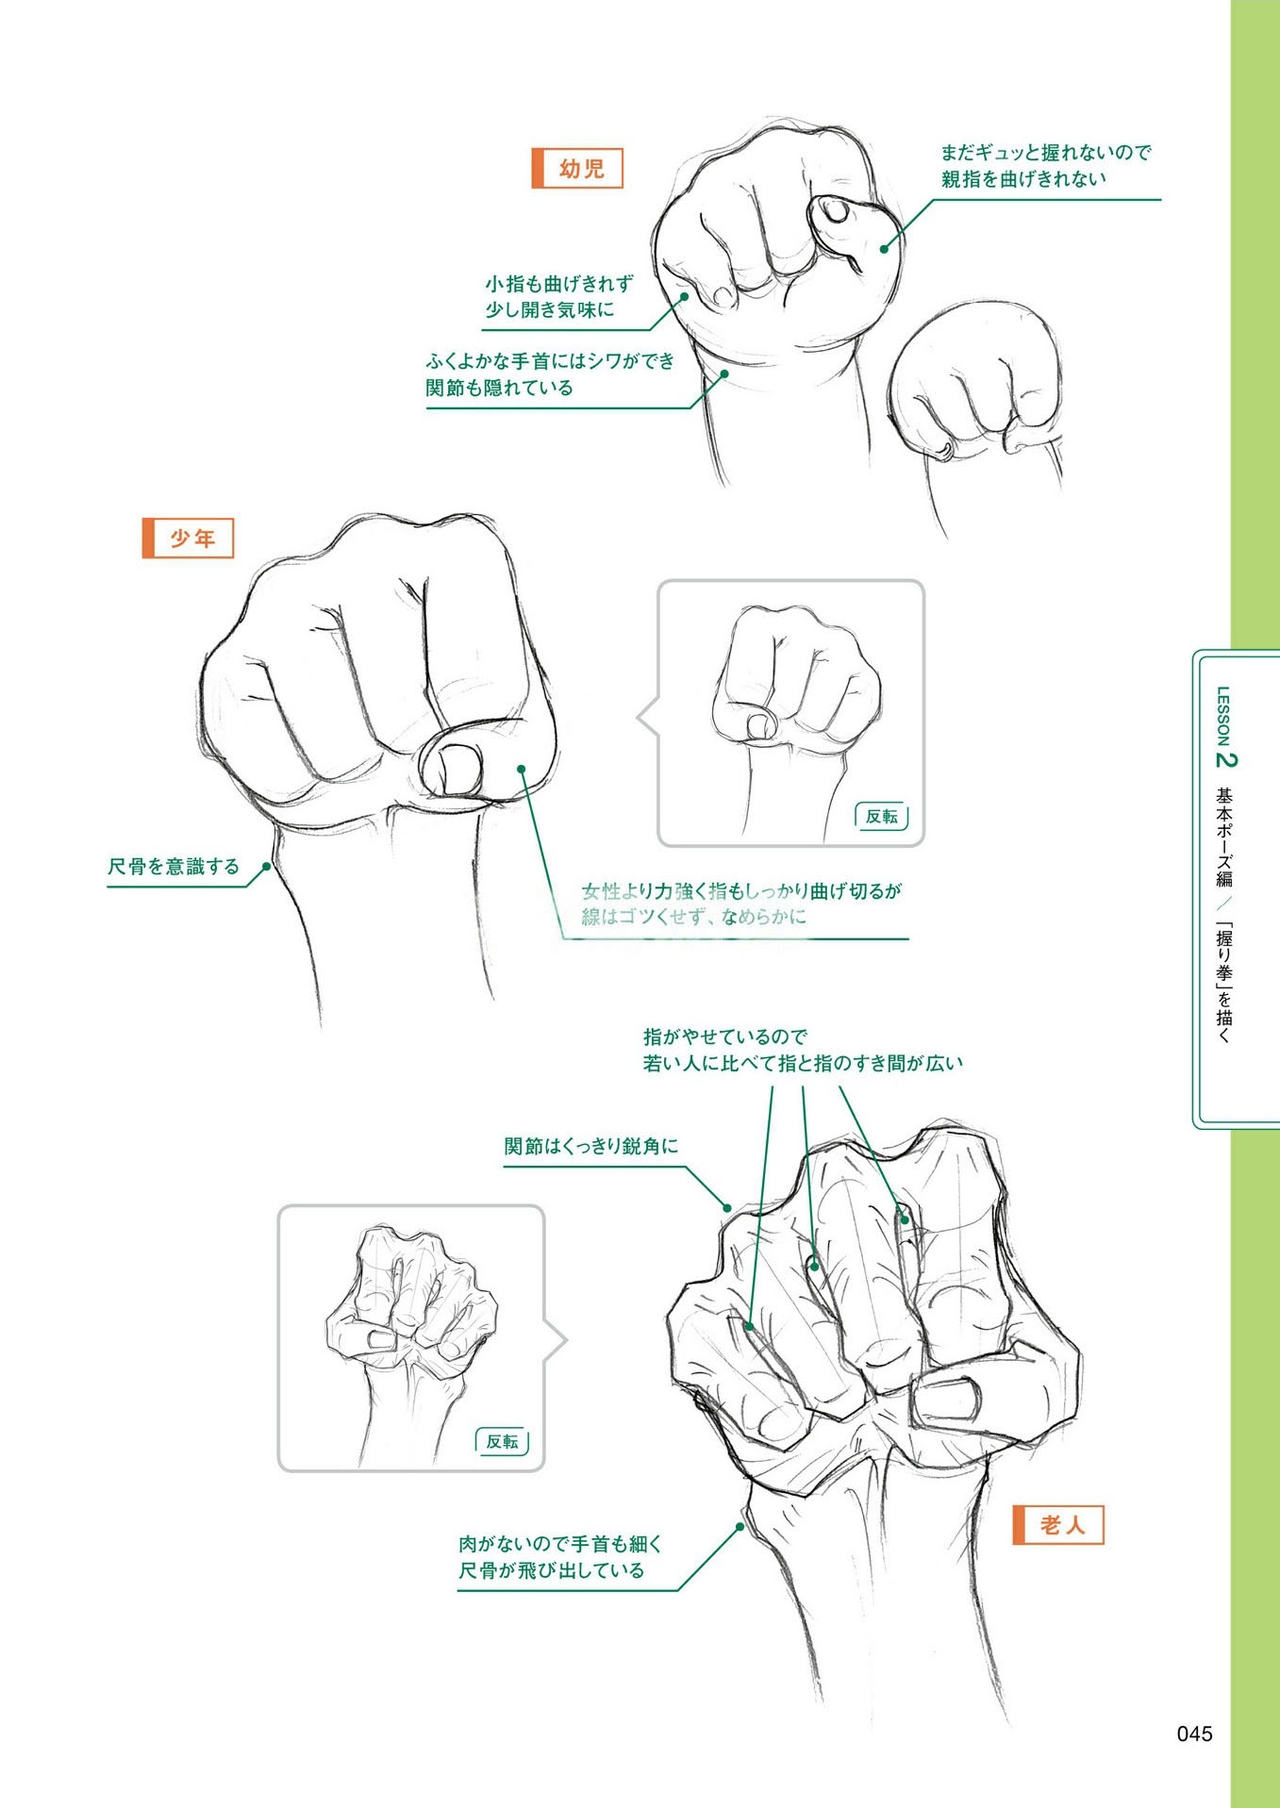 How to draw hands 45